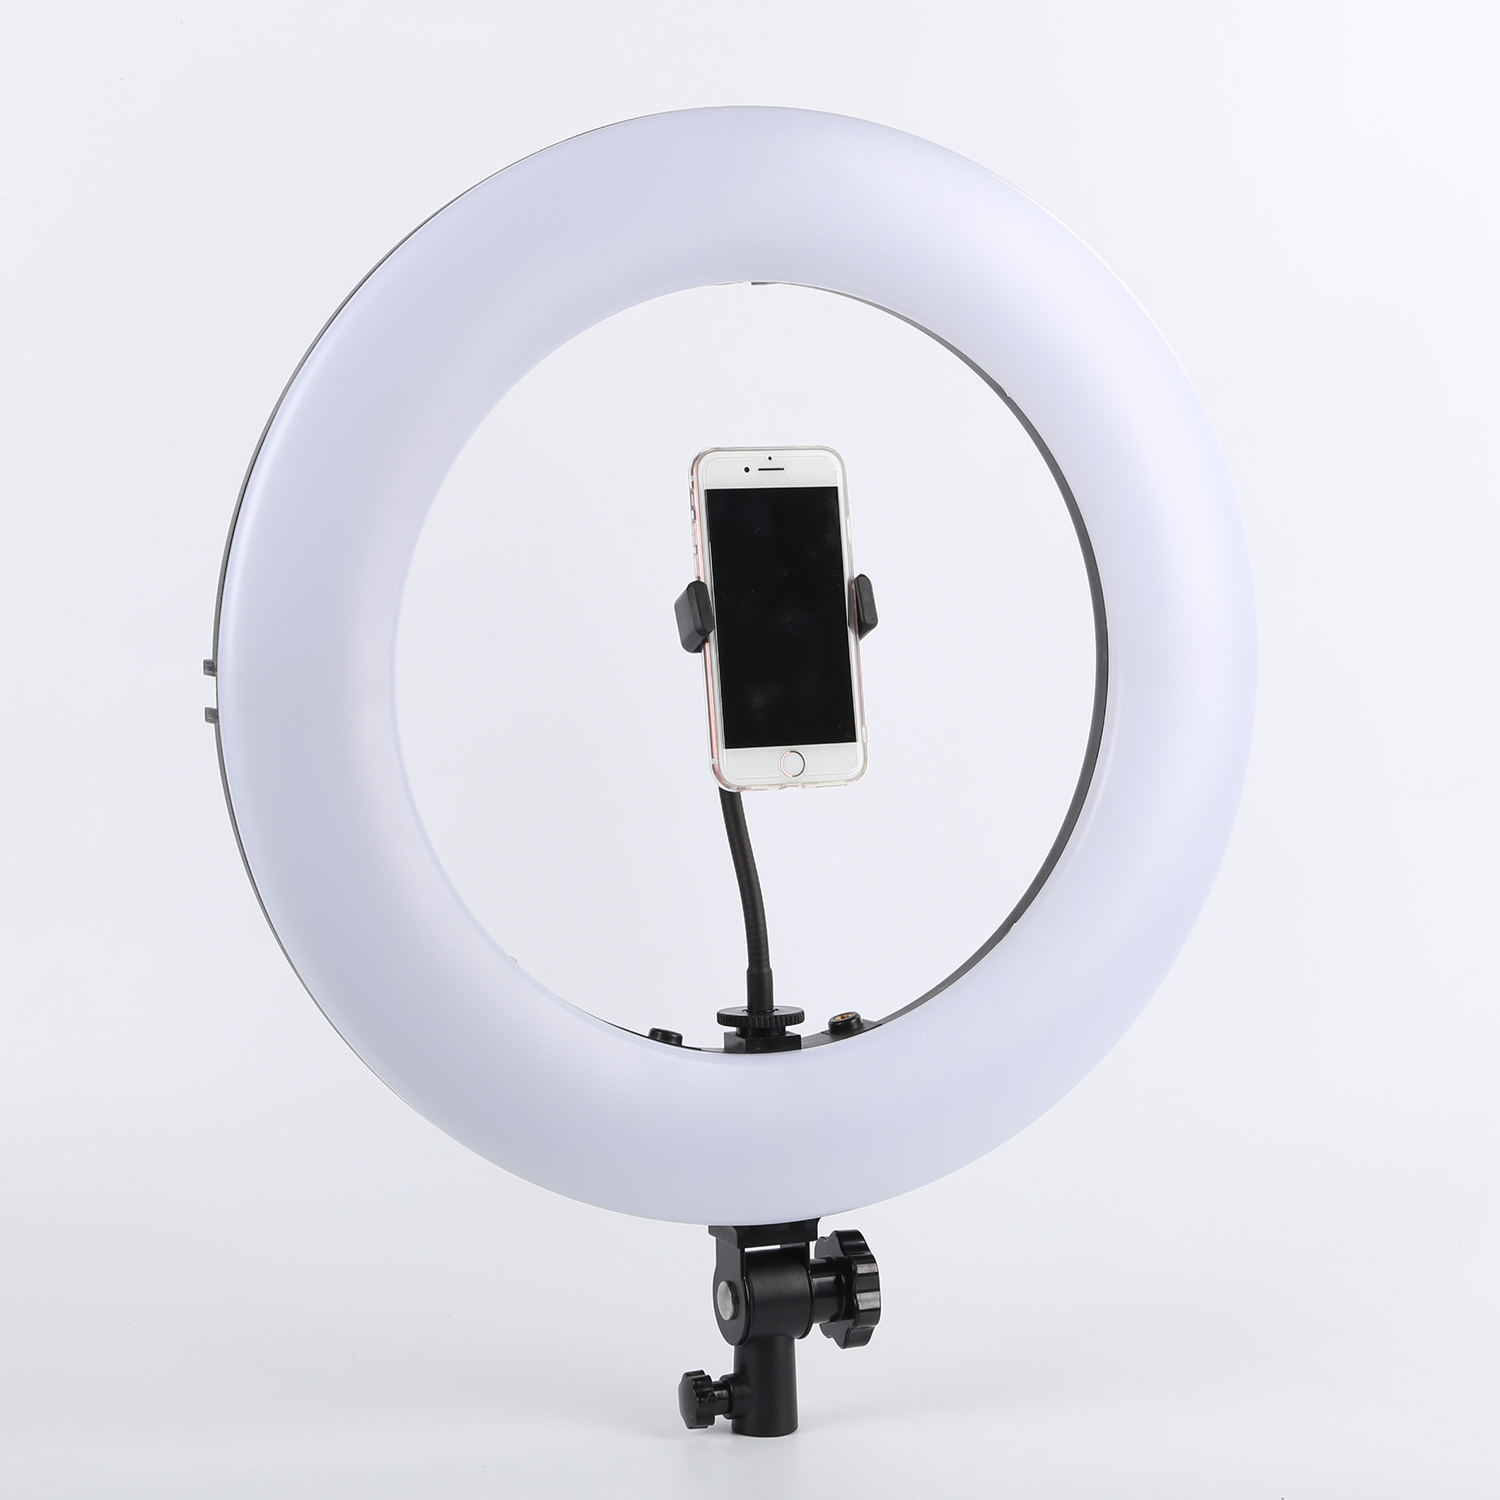 SM1888 II Digital LED Ring Light With Stand